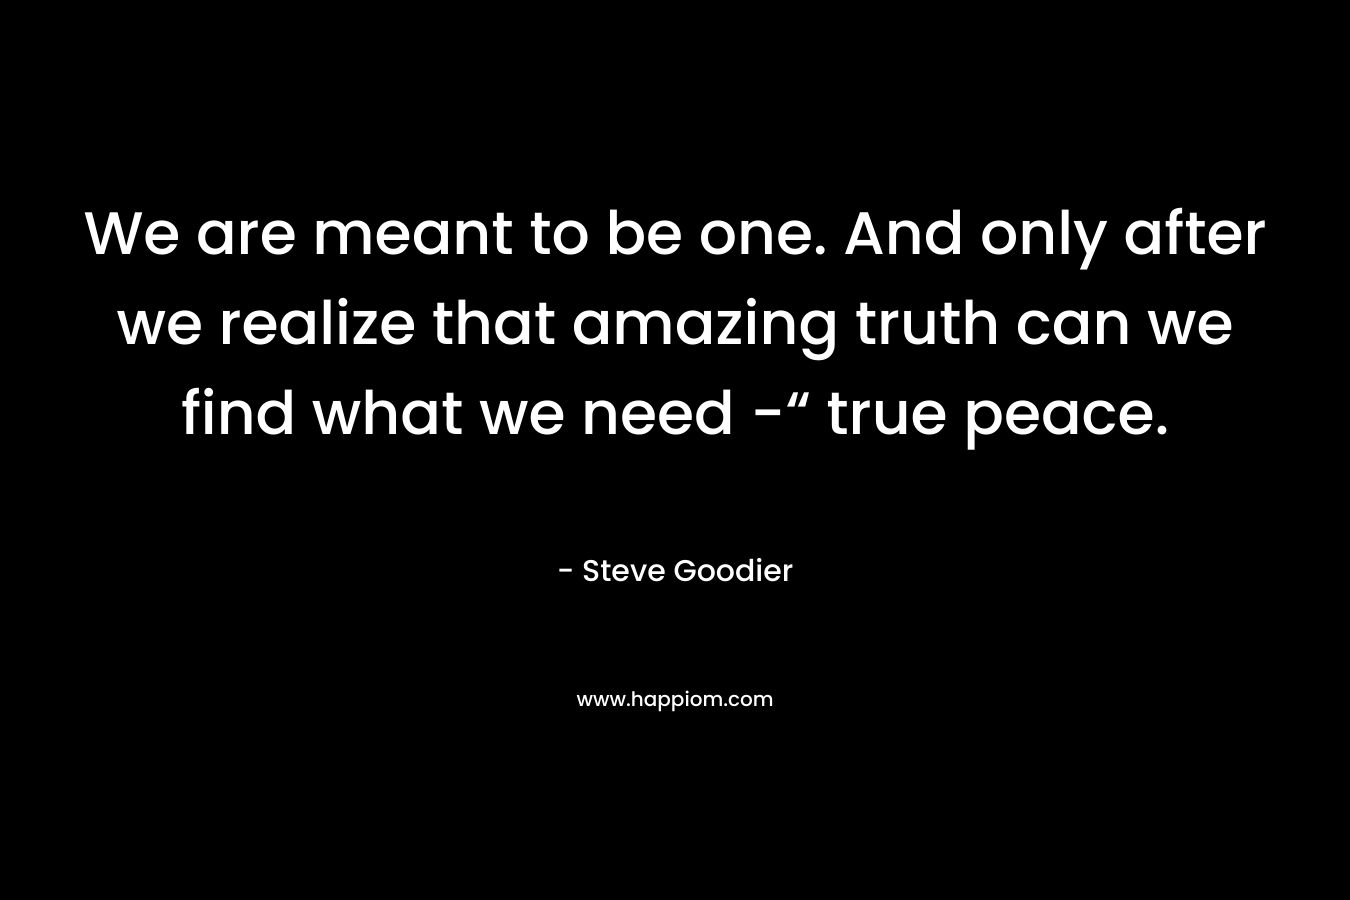 We are meant to be one. And only after we realize that amazing truth can we find what we need -“ true peace. – Steve Goodier